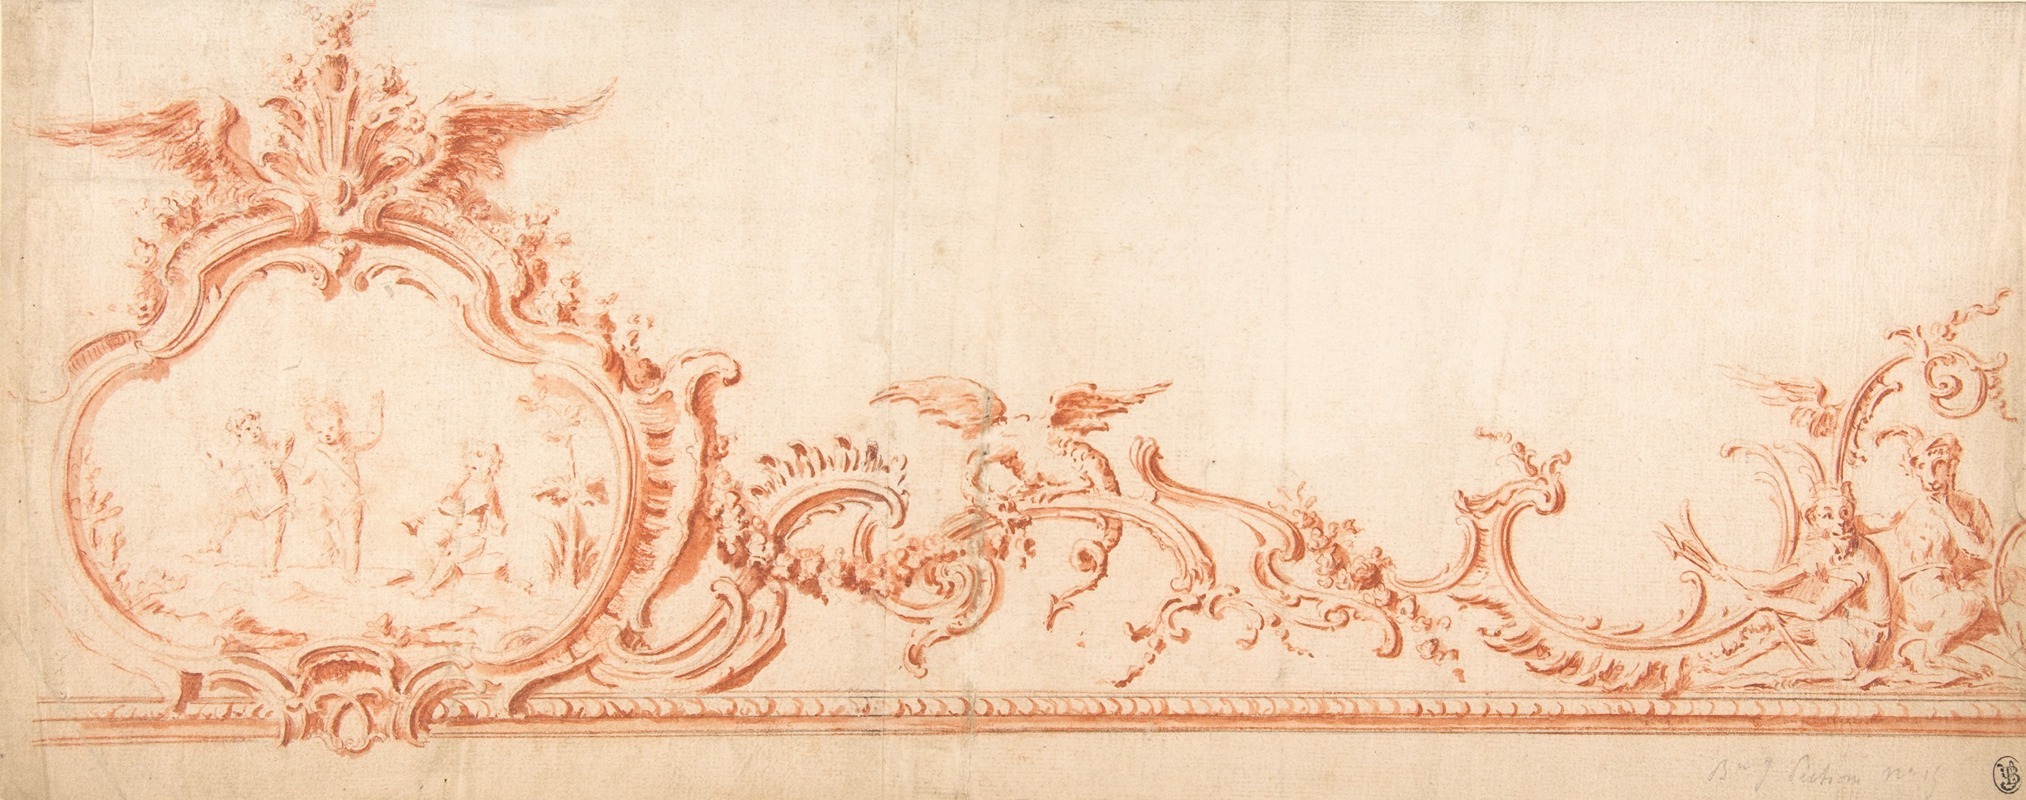 Gilles-Marie Oppenord - Ornament Drawing with Cartouche, Putti, and Monkeys